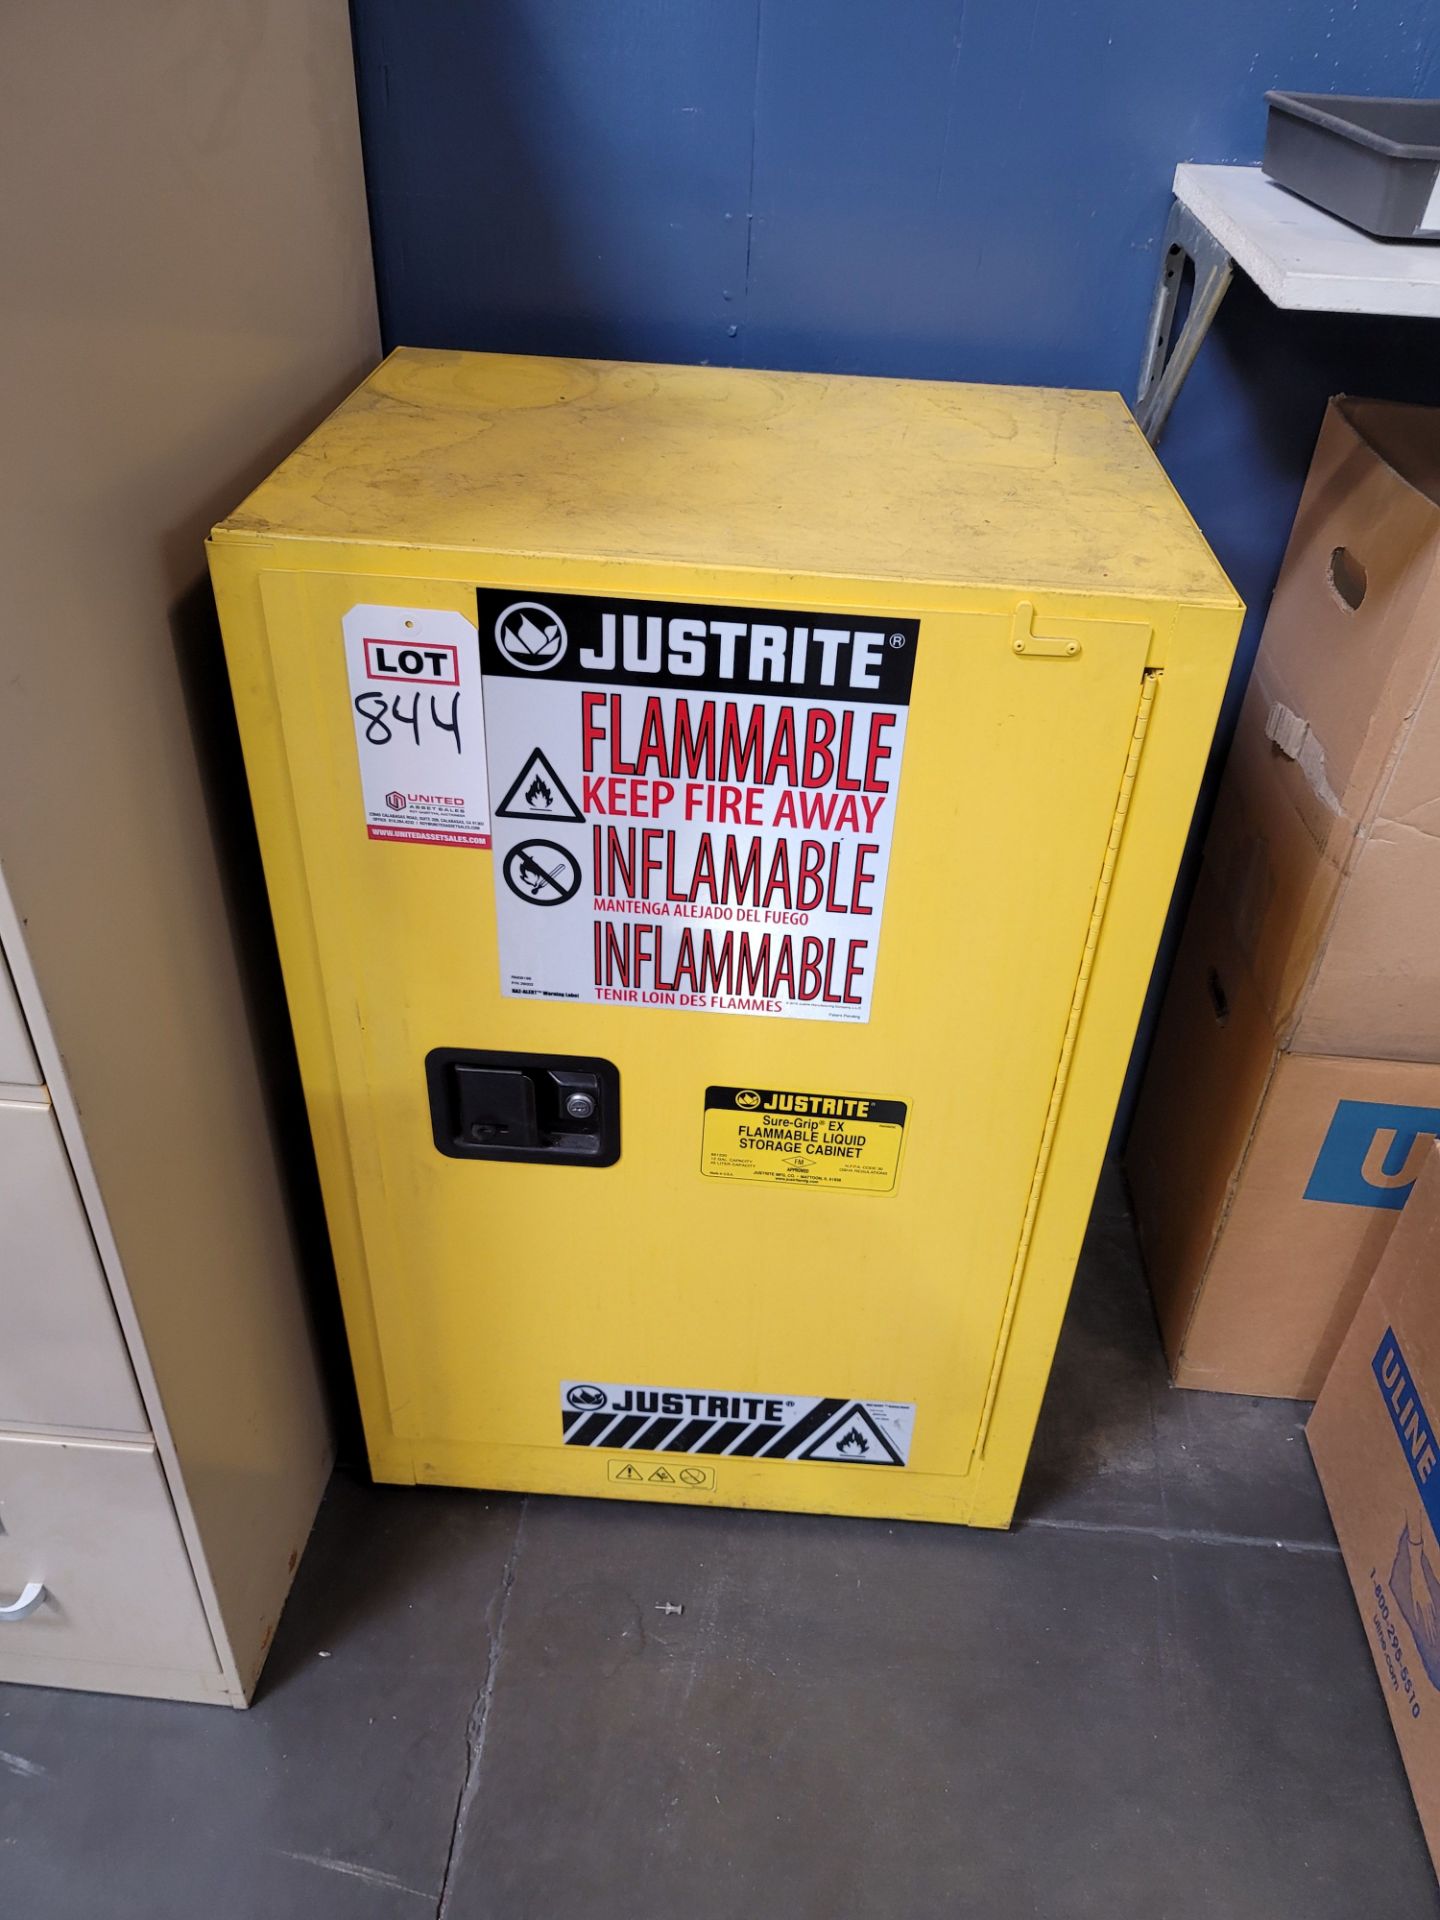 JUSTRITE FLAMMABLE LIQUID STORAGE CABINET, 12-GALLON CAPACITY, WITH OR WITHOUT CONTENTS